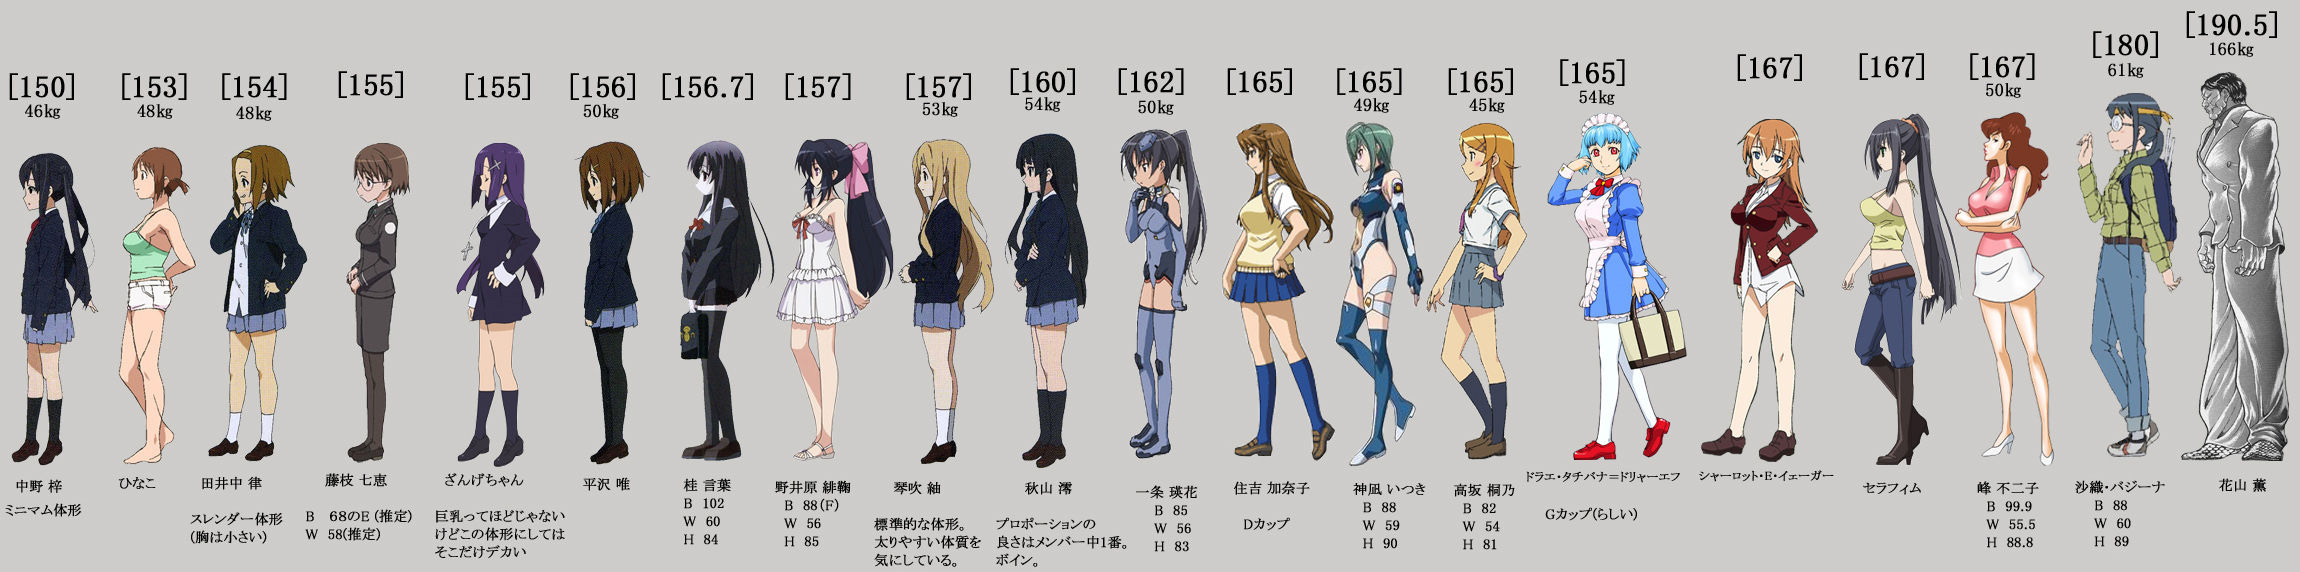 Female-Anime-Characters-Height-Weight-Comparison-Chart